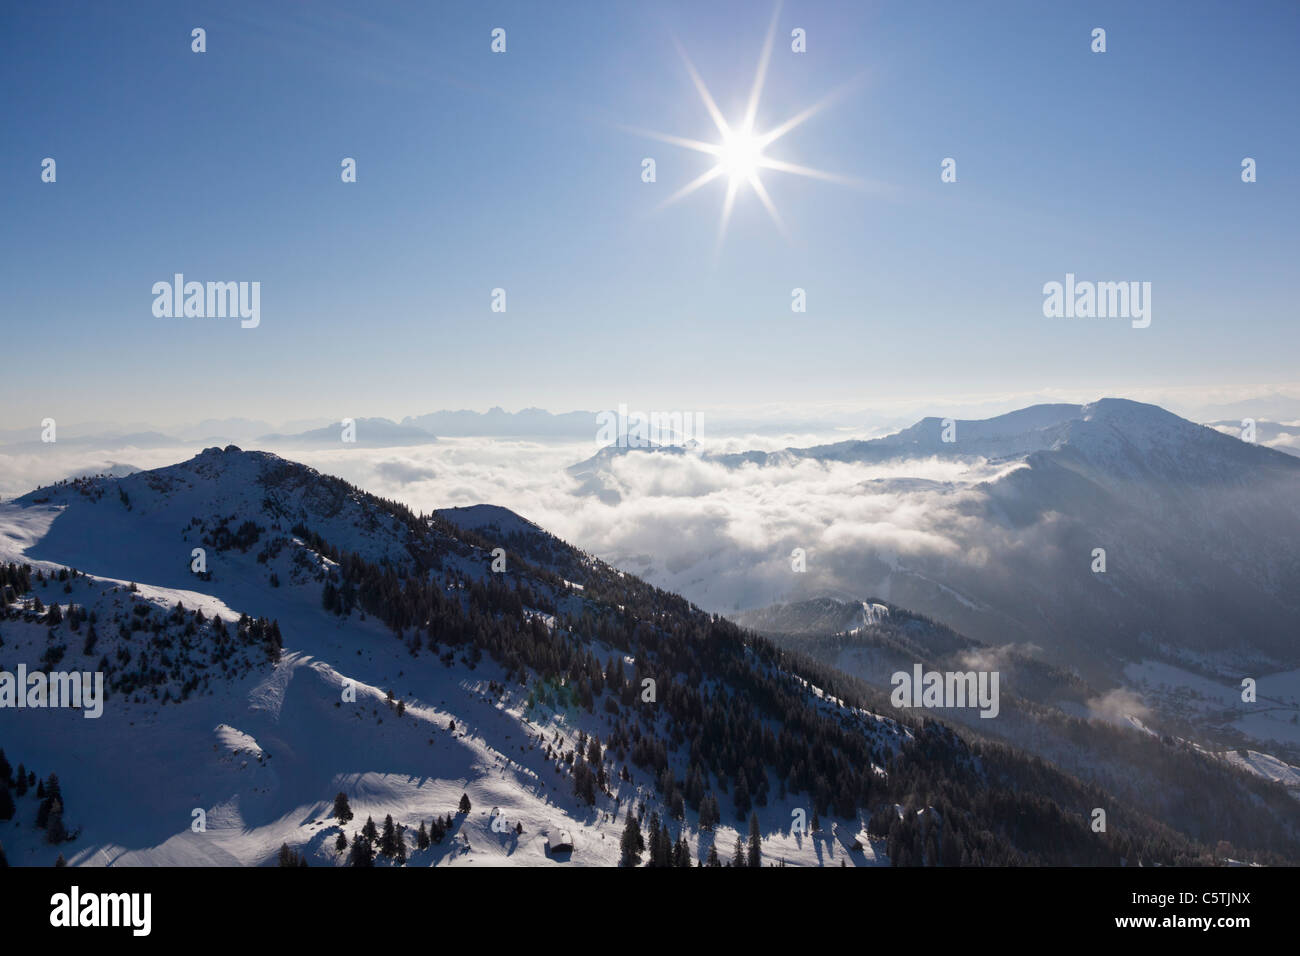 South Germany, Upper Bavaria, Bayrischzell, View of european alps from Wendelstein mountain Stock Photo